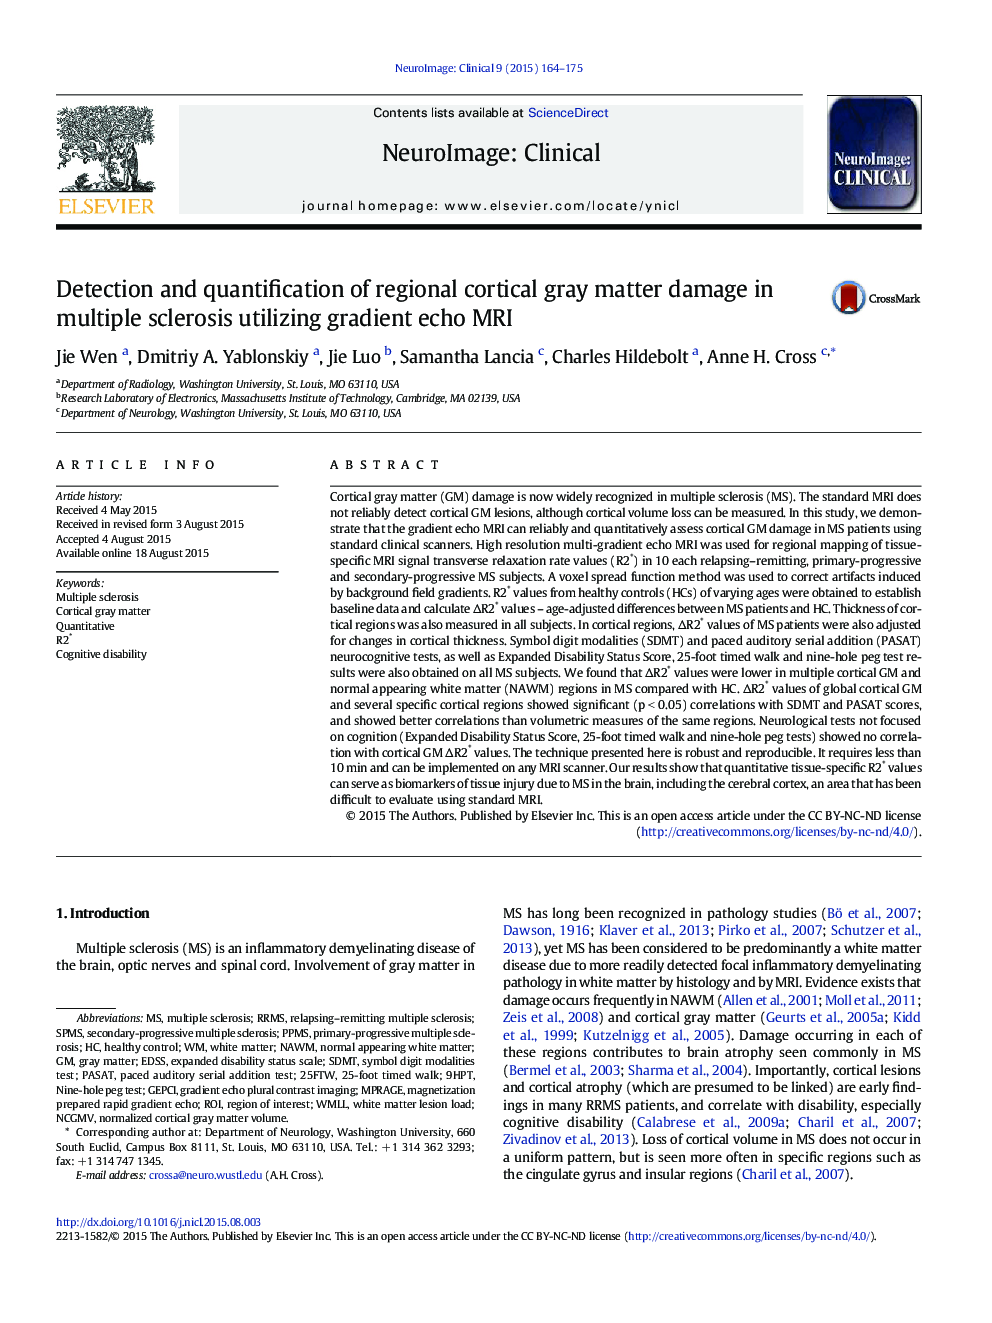 Detection and quantification of regional cortical gray matter damage in multiple sclerosis utilizing gradient echo MRI